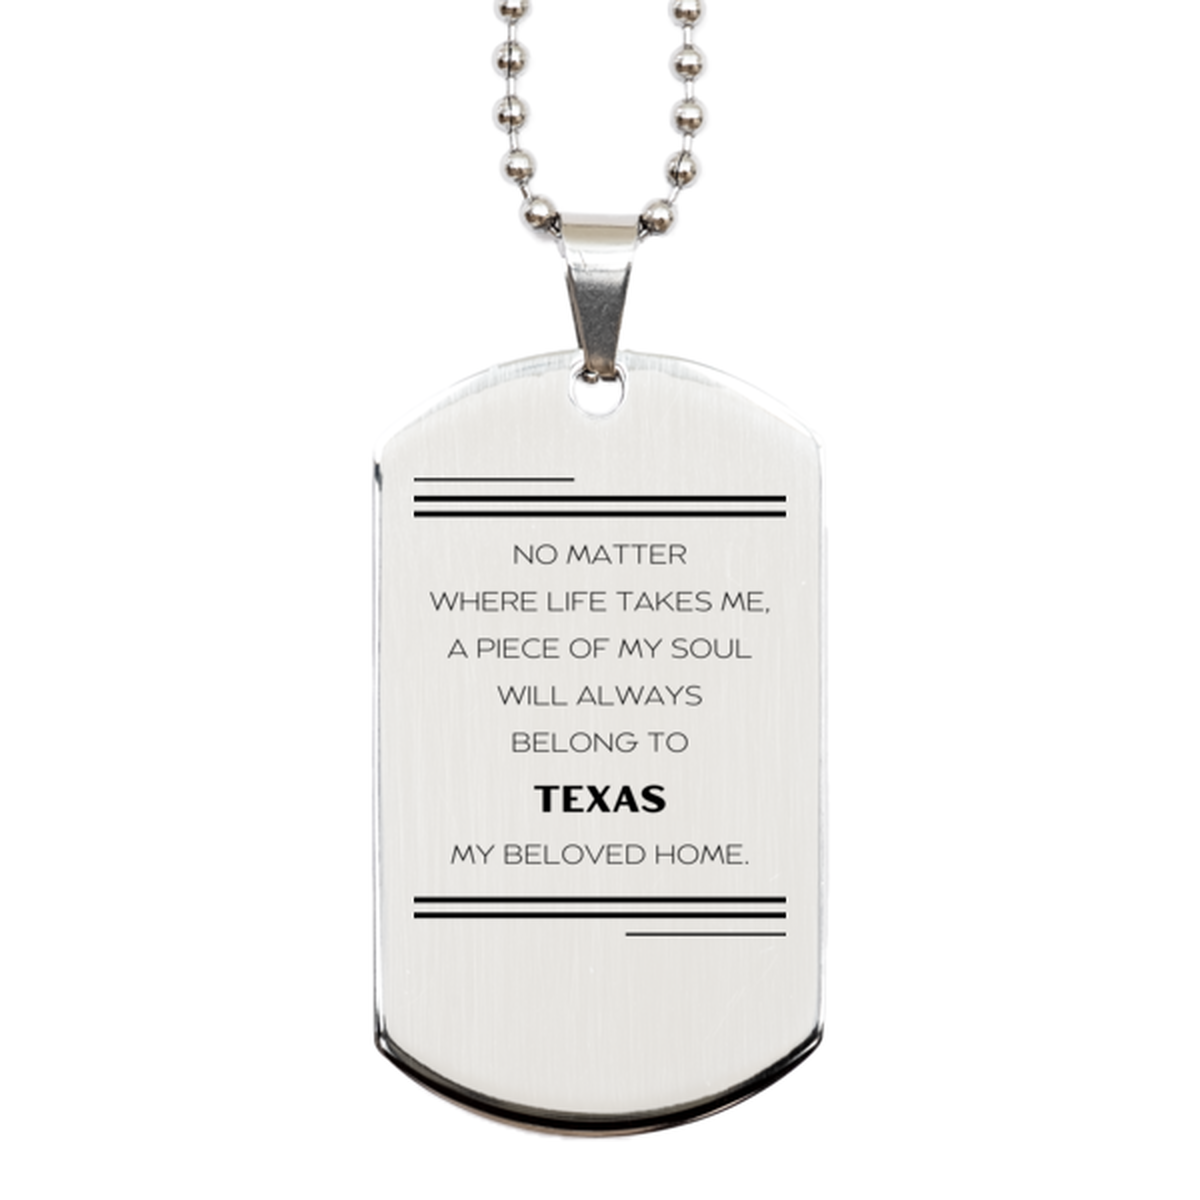 Love Texas State Gifts, My soul will always belong to Texas, Proud Silver Dog Tag, Birthday Unique Gifts For Texas Men, Women, Friends